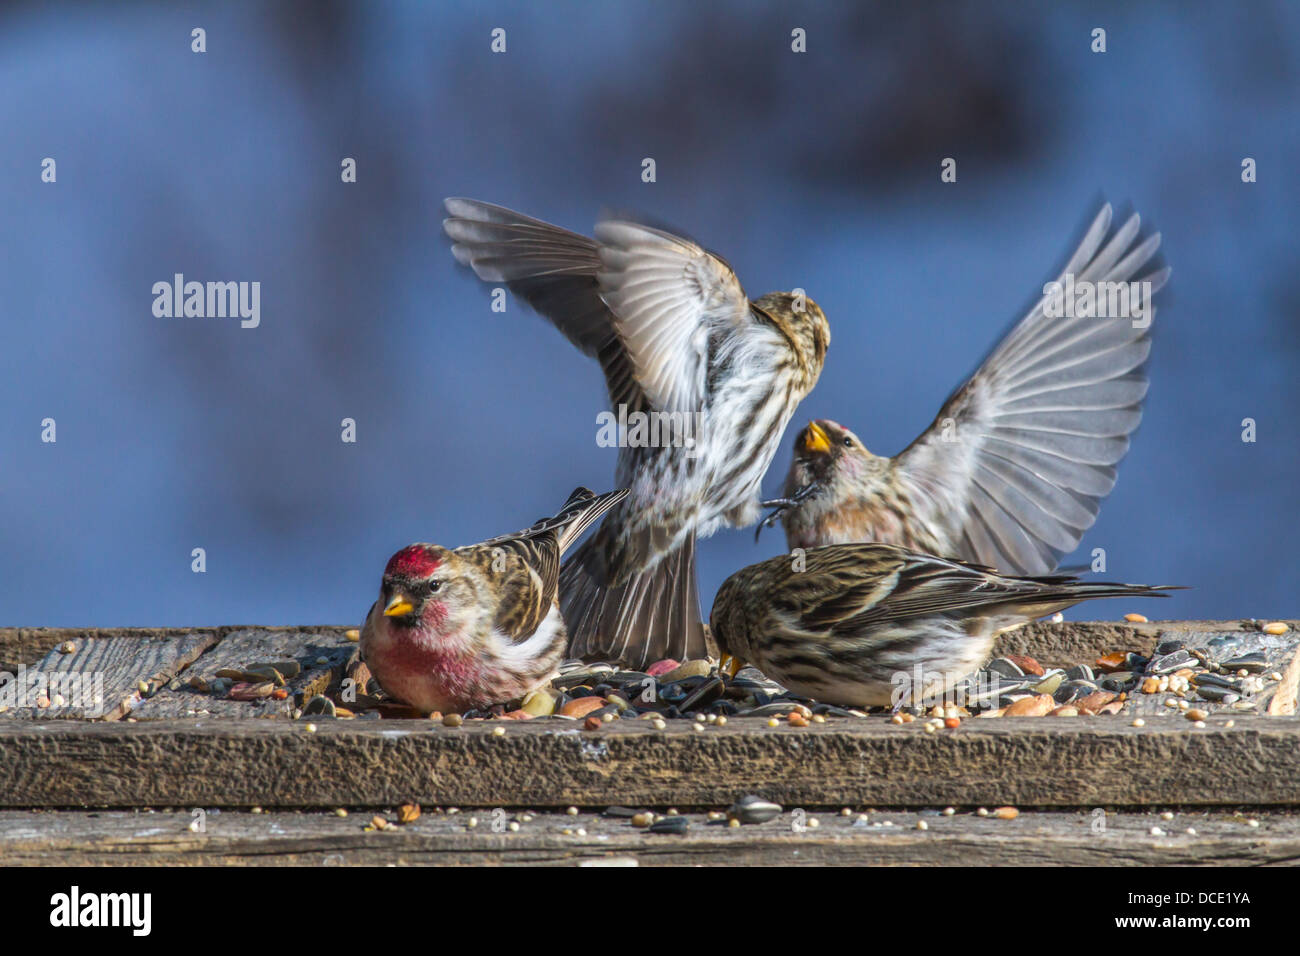 Common Redpoll (Carduelis flammea) Colorful redpolls fighting, in air, over food, at feeder. Johnsons Island, Alberta, Canada, Stock Photo